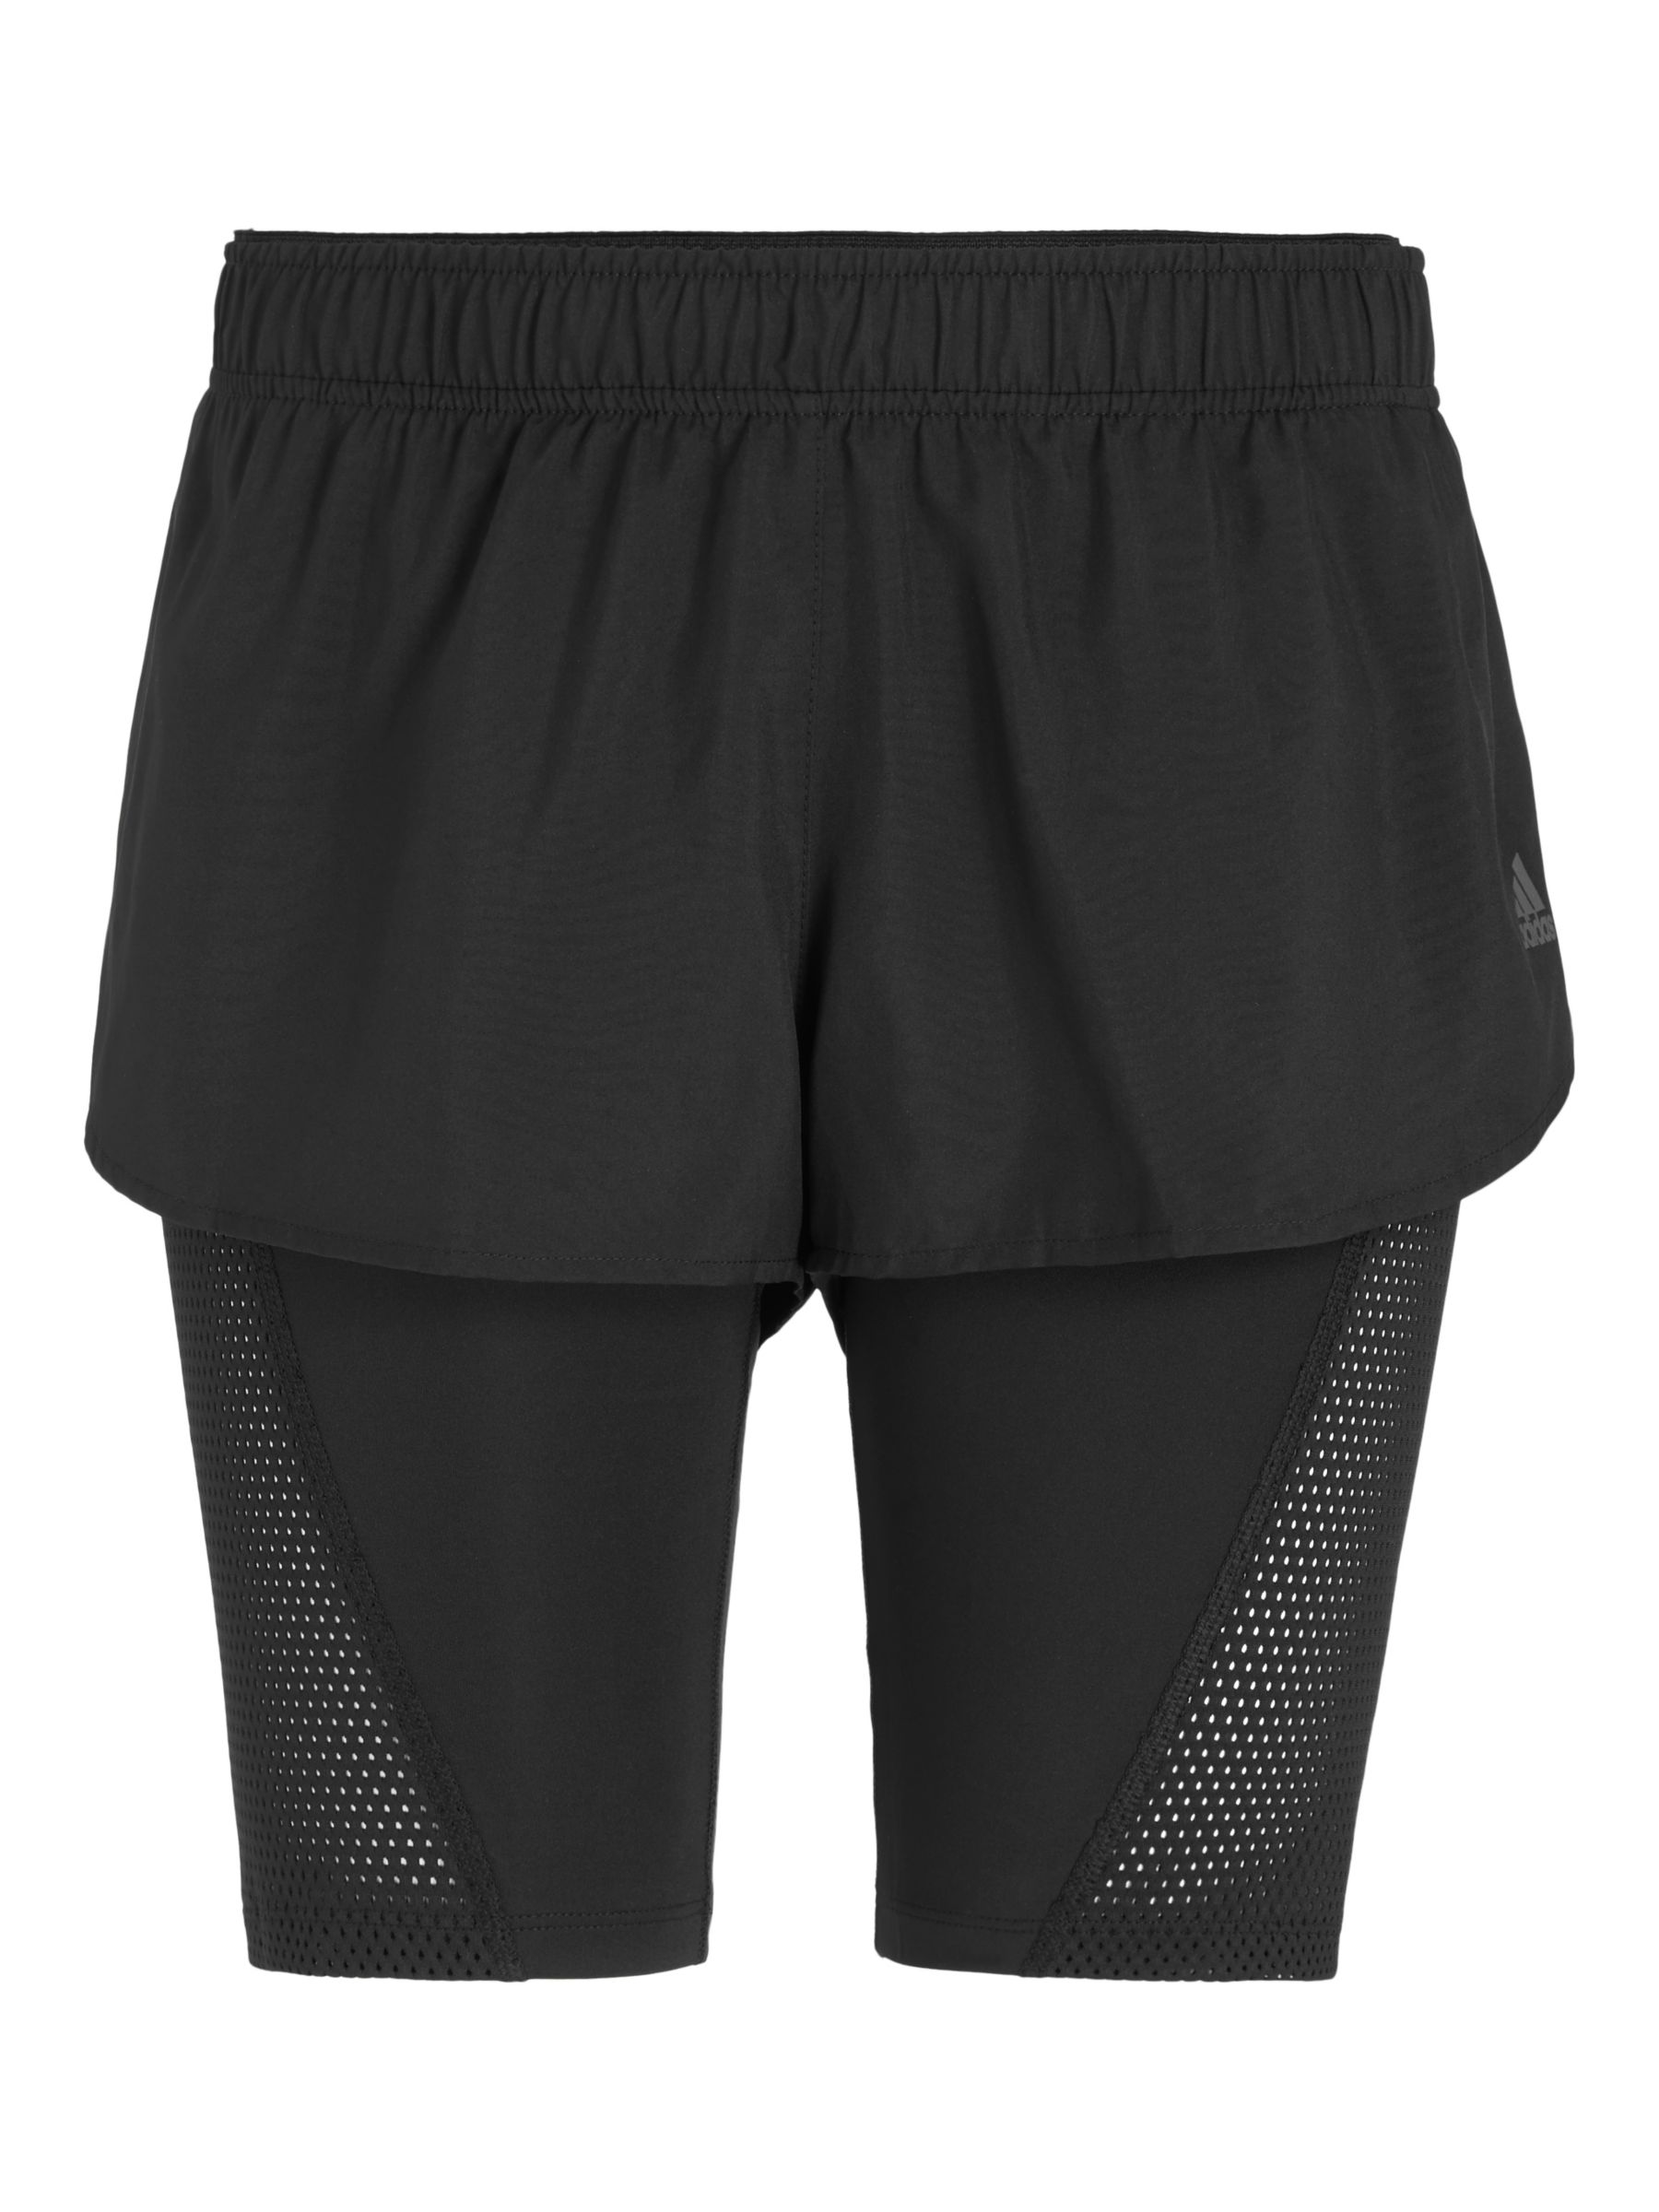 adidas two in one running shorts